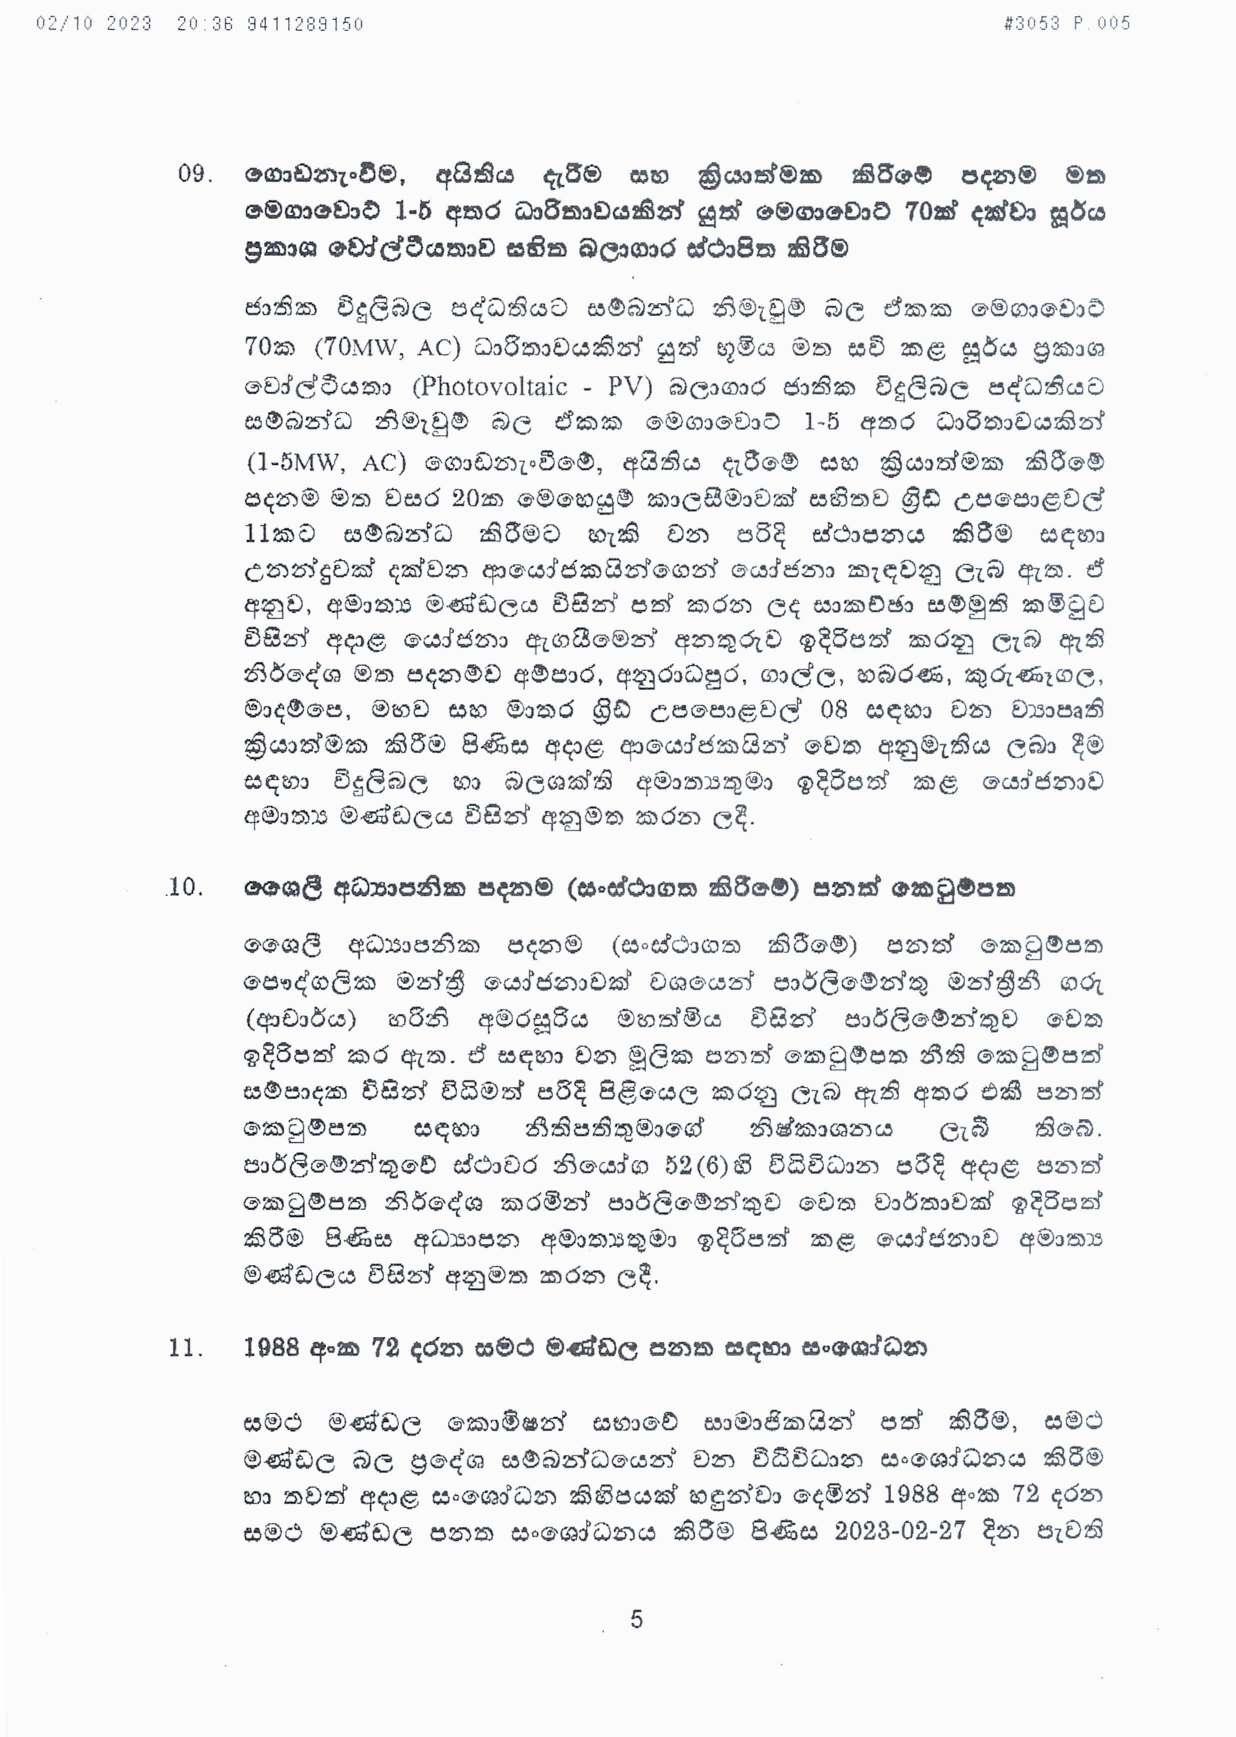 Cabinet Decision on 02.10.2023 1 page 005